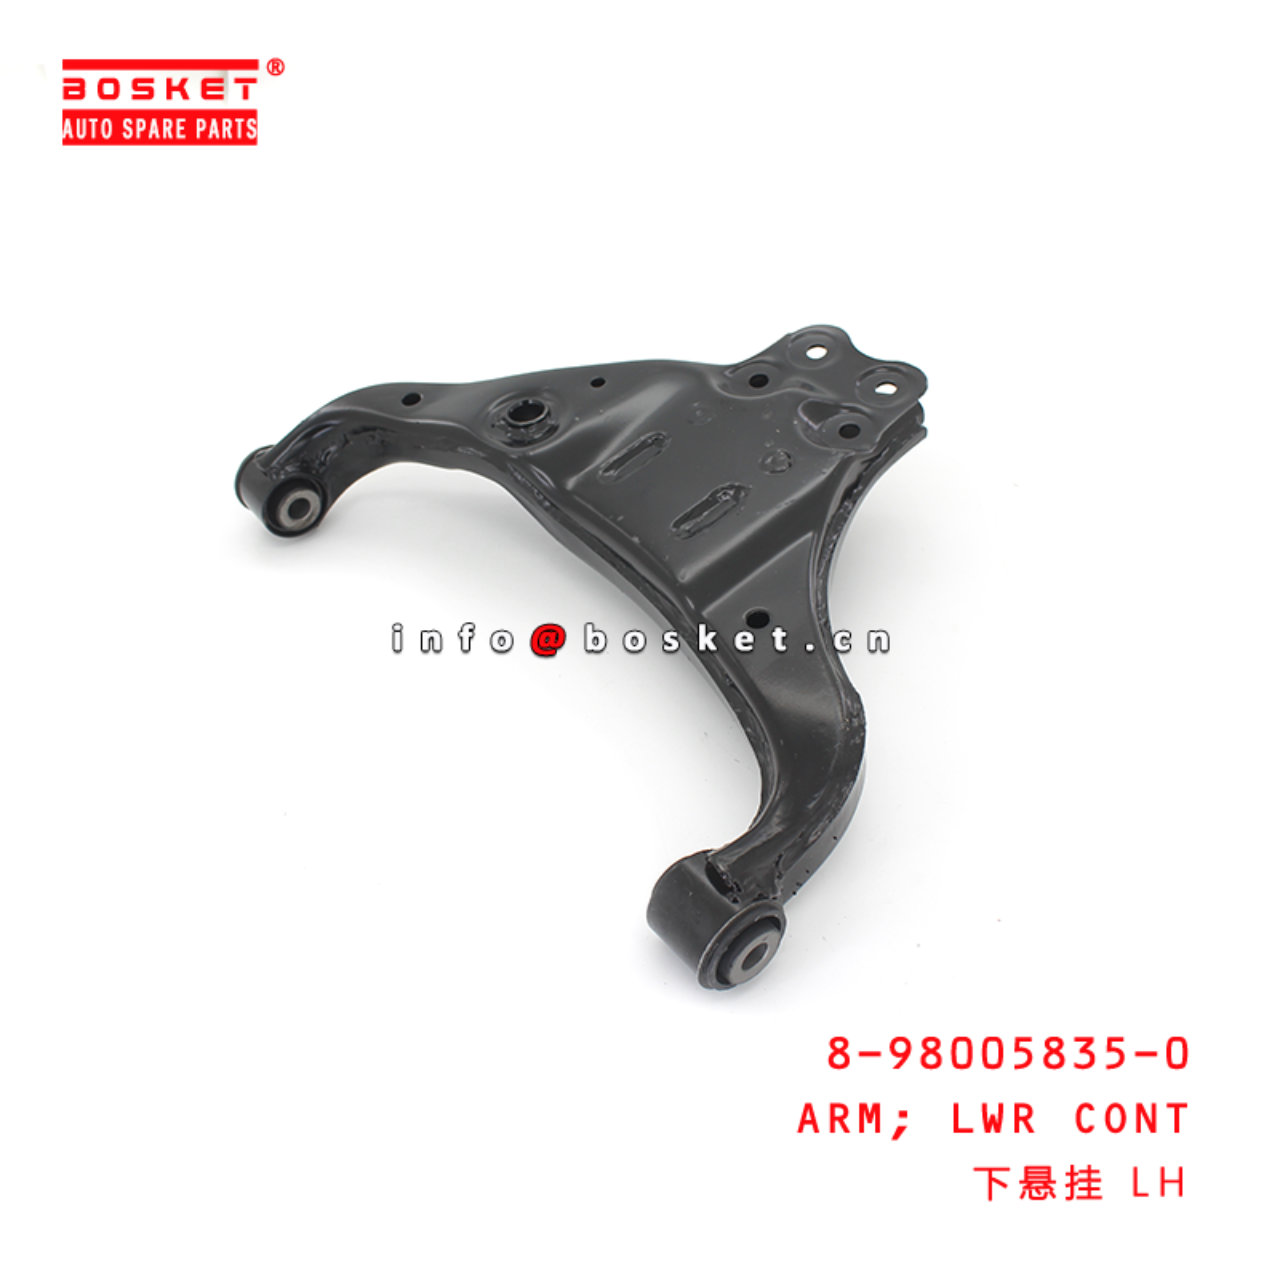 8-98005835-0 Lower Control Arm suitable for ISUZU D-MAX 8980058350